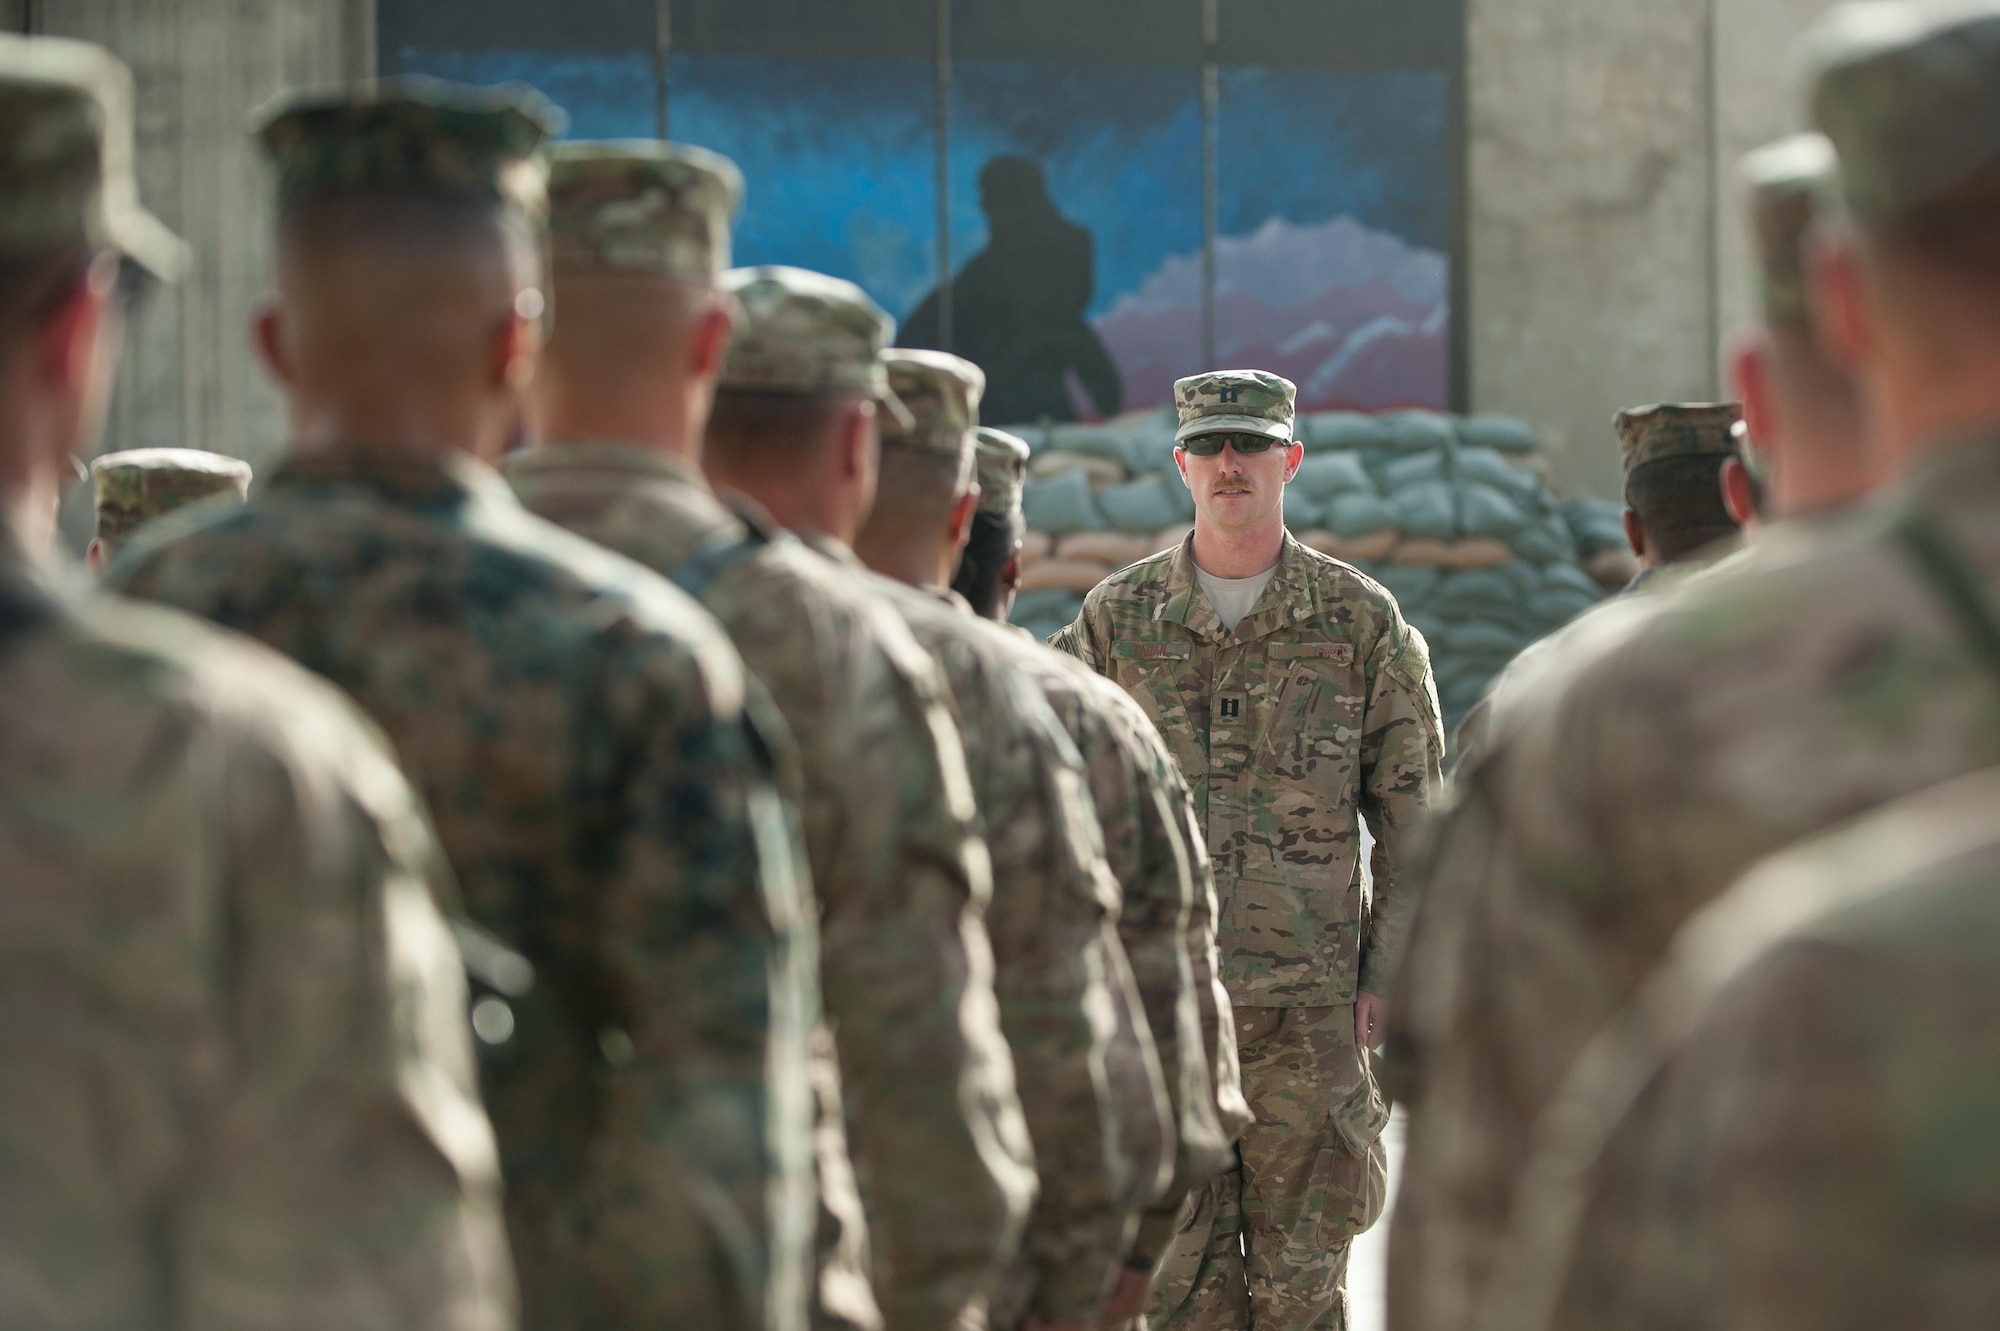 U.S. Air Force Capt. Bryan Fagan, 455th Expeditionary Aircraft Maintenance Squadron, gives commands to a flight of Service members during the Prisoners Of War, Missing In Action Remembrance and Retreat Ceremony at BAF, Afghanistan, Sept. 17, 2015. The ceremony was in honor of National POW/MIA Remembrance Day, which is observed annually in the United States on the third Friday of September. (U.S. Air Force photo by Tech. Sgt. Joseph Swafford/Released)